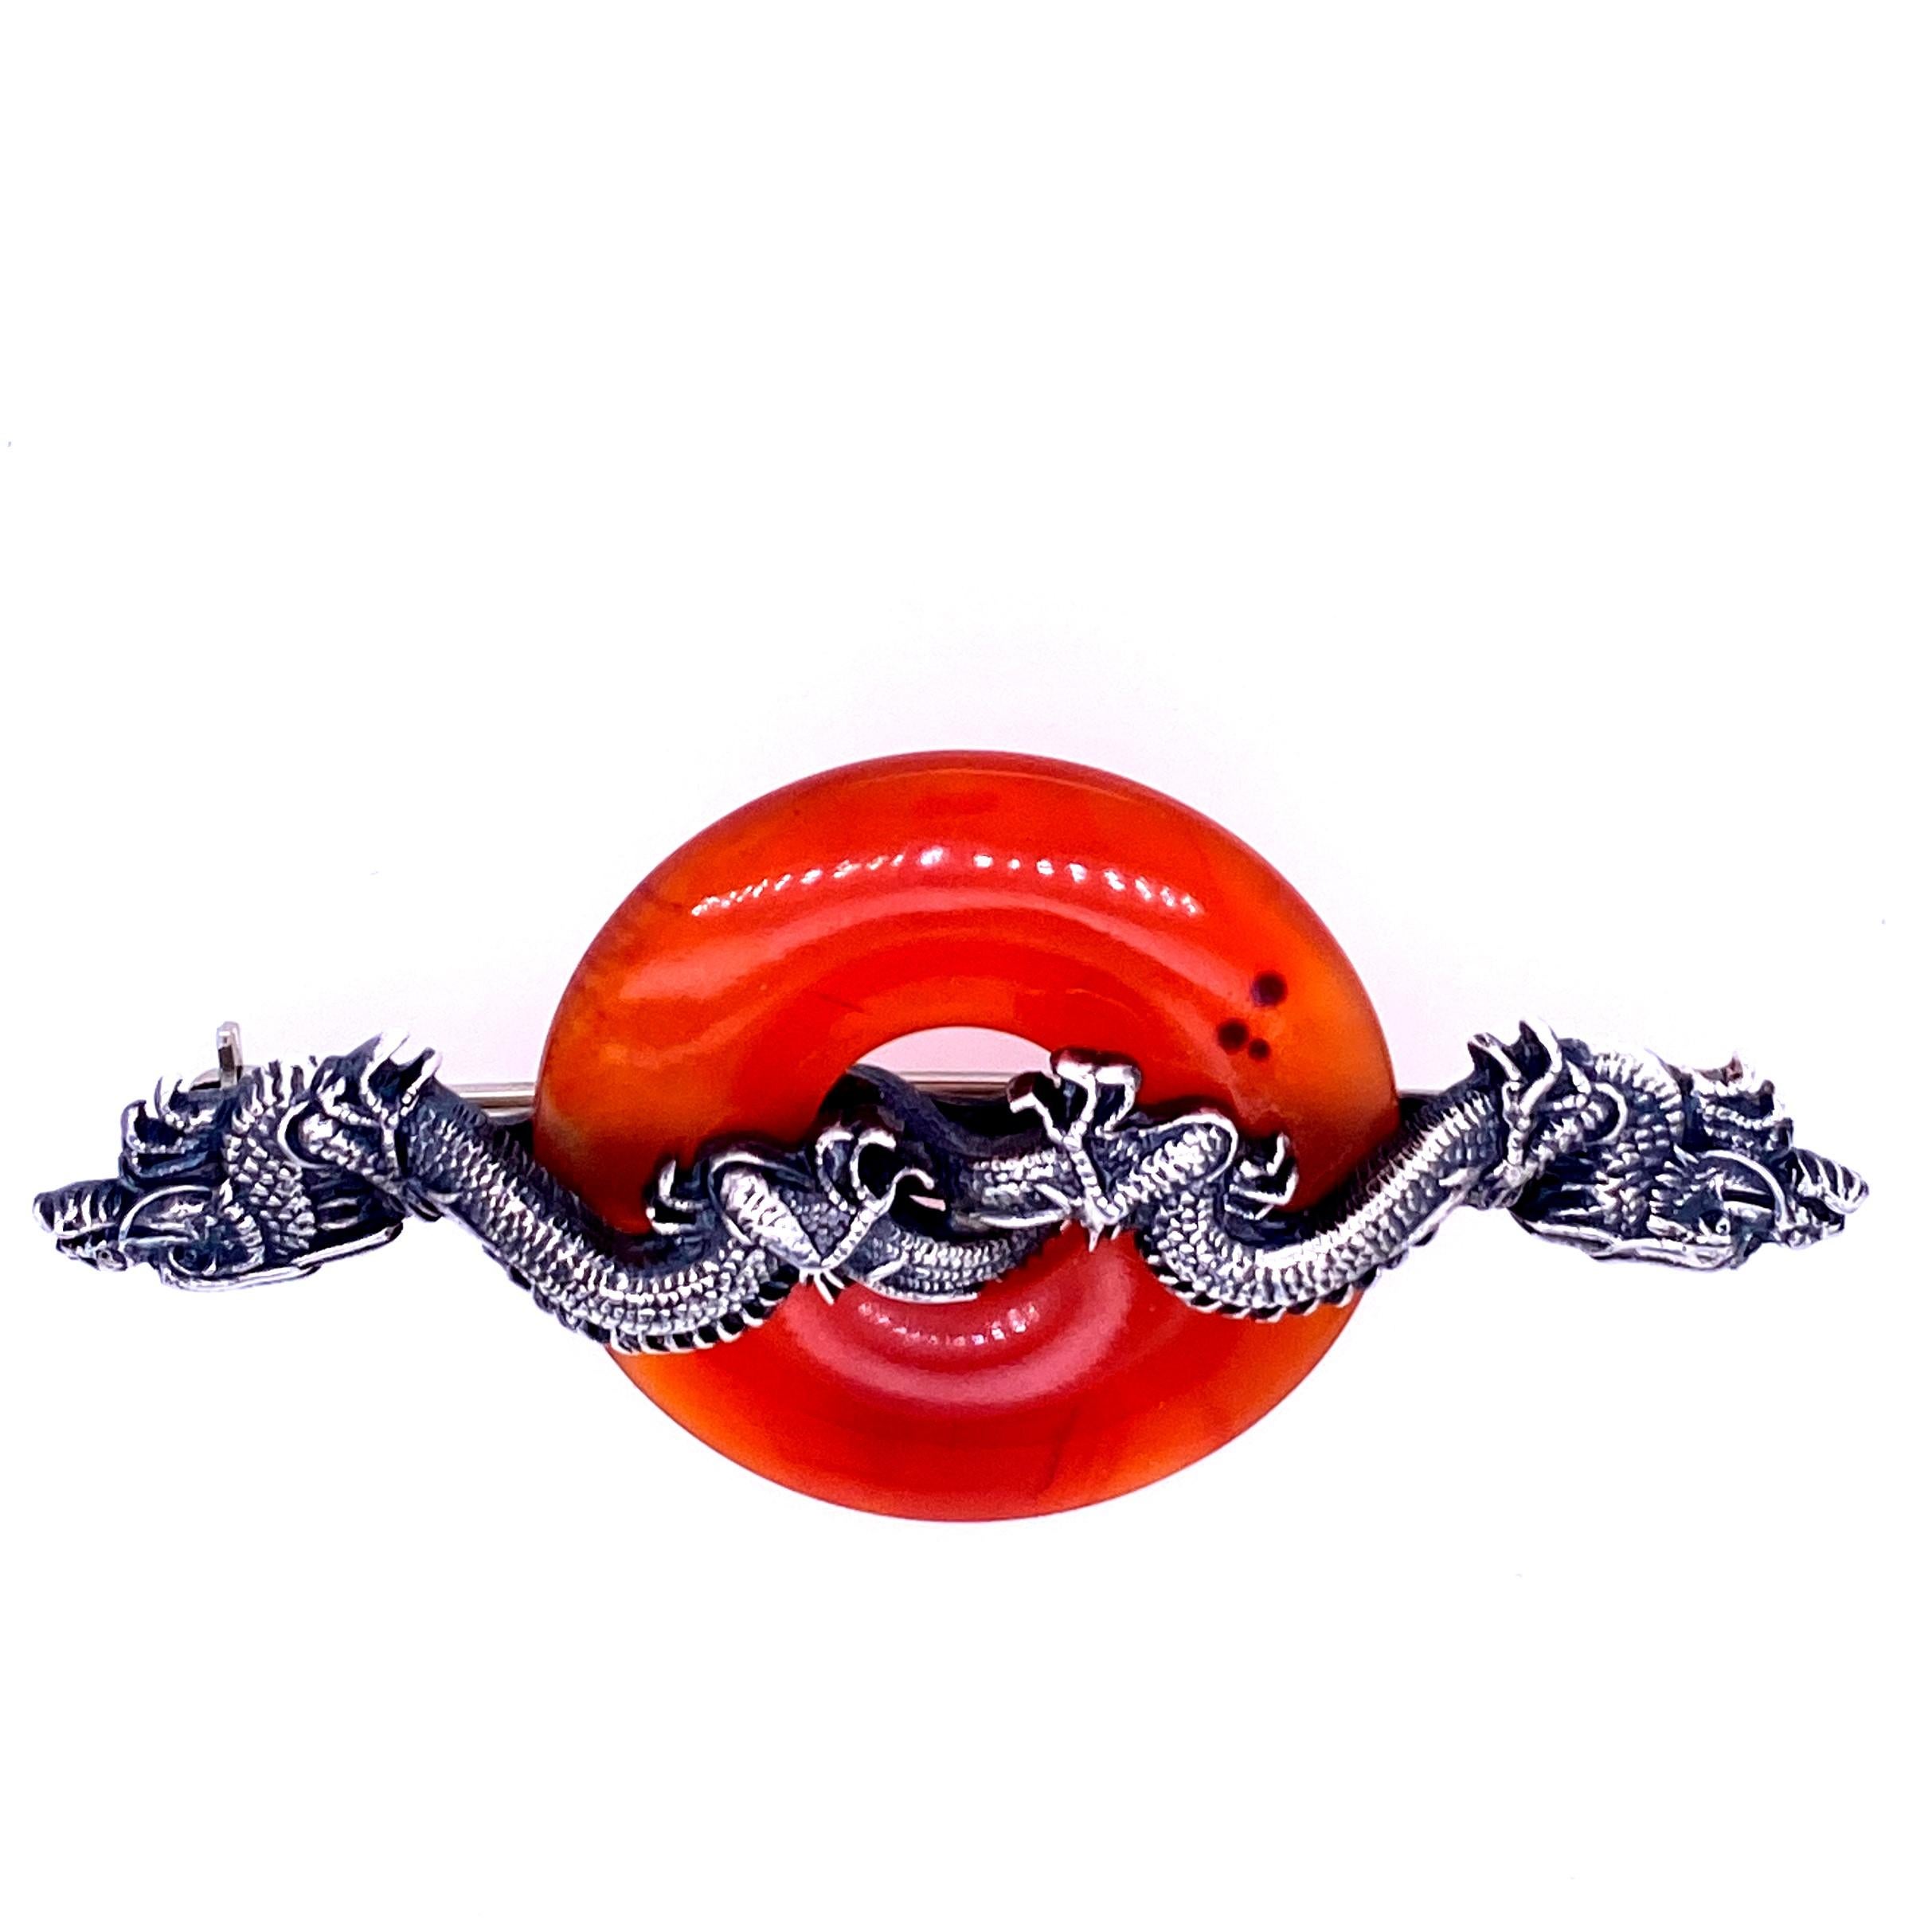 One sterling silver (engraved with AOSX) dragon pin by Carl Schon measuring 2.5 inches long x 1.25 inches wide featuring one 1.25 inches in diameter donut shaped carnelian with a tradition pin back. Circa 1950s